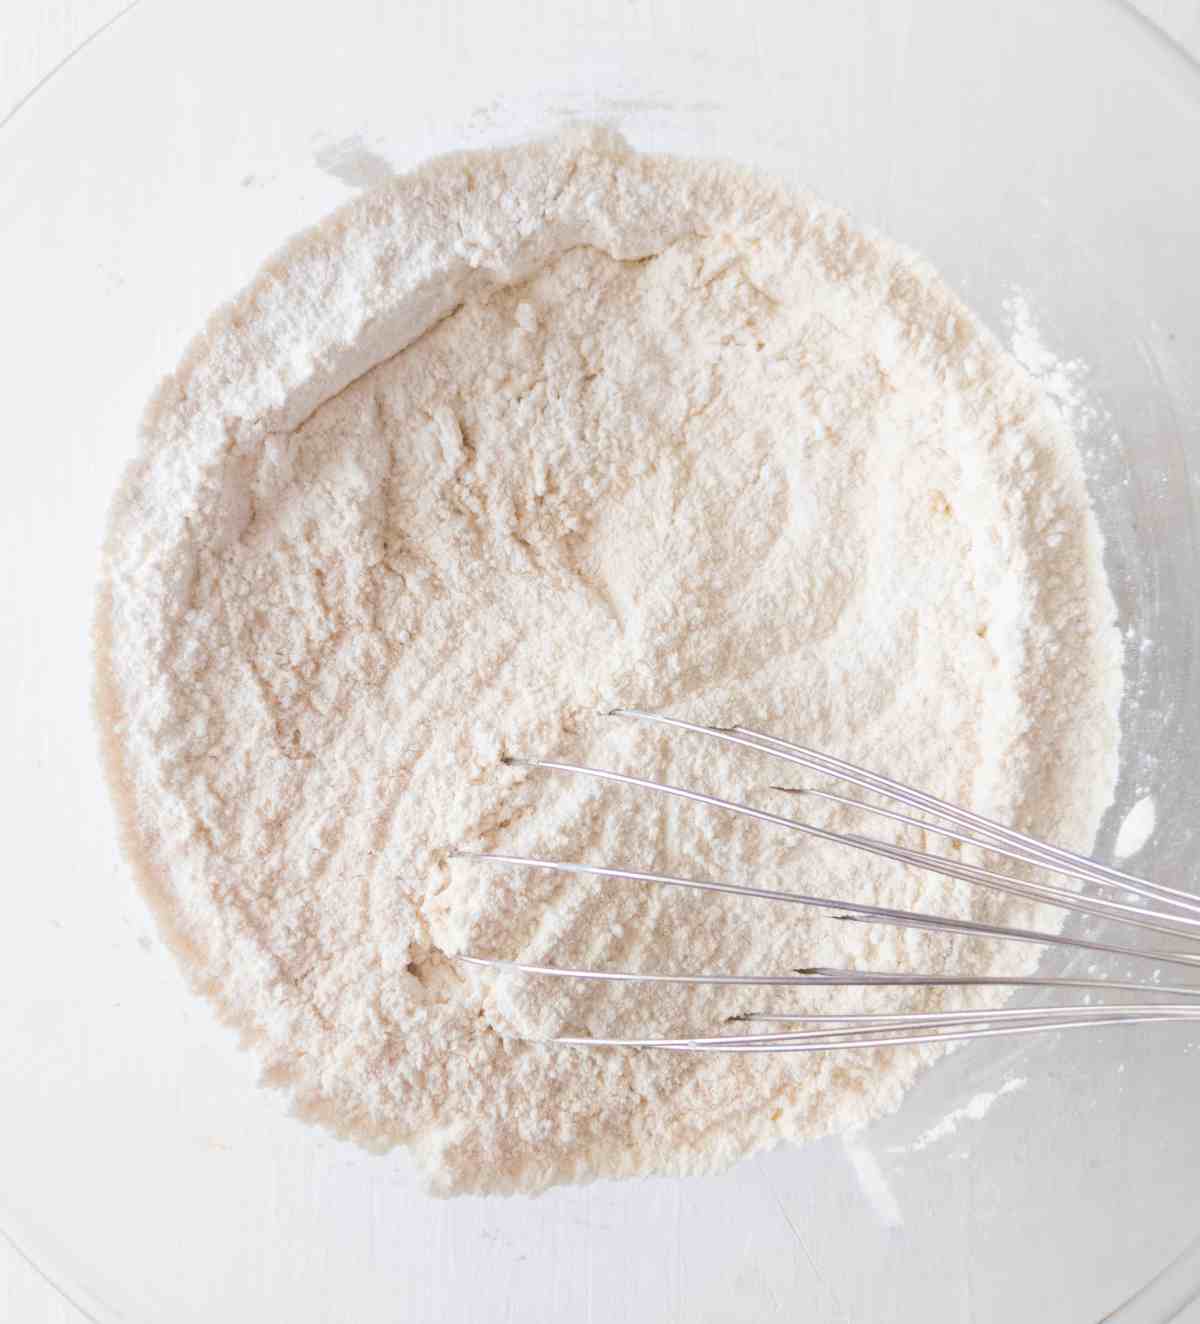 Dry ingredients mixed in a large mixing bowl with a whisk.